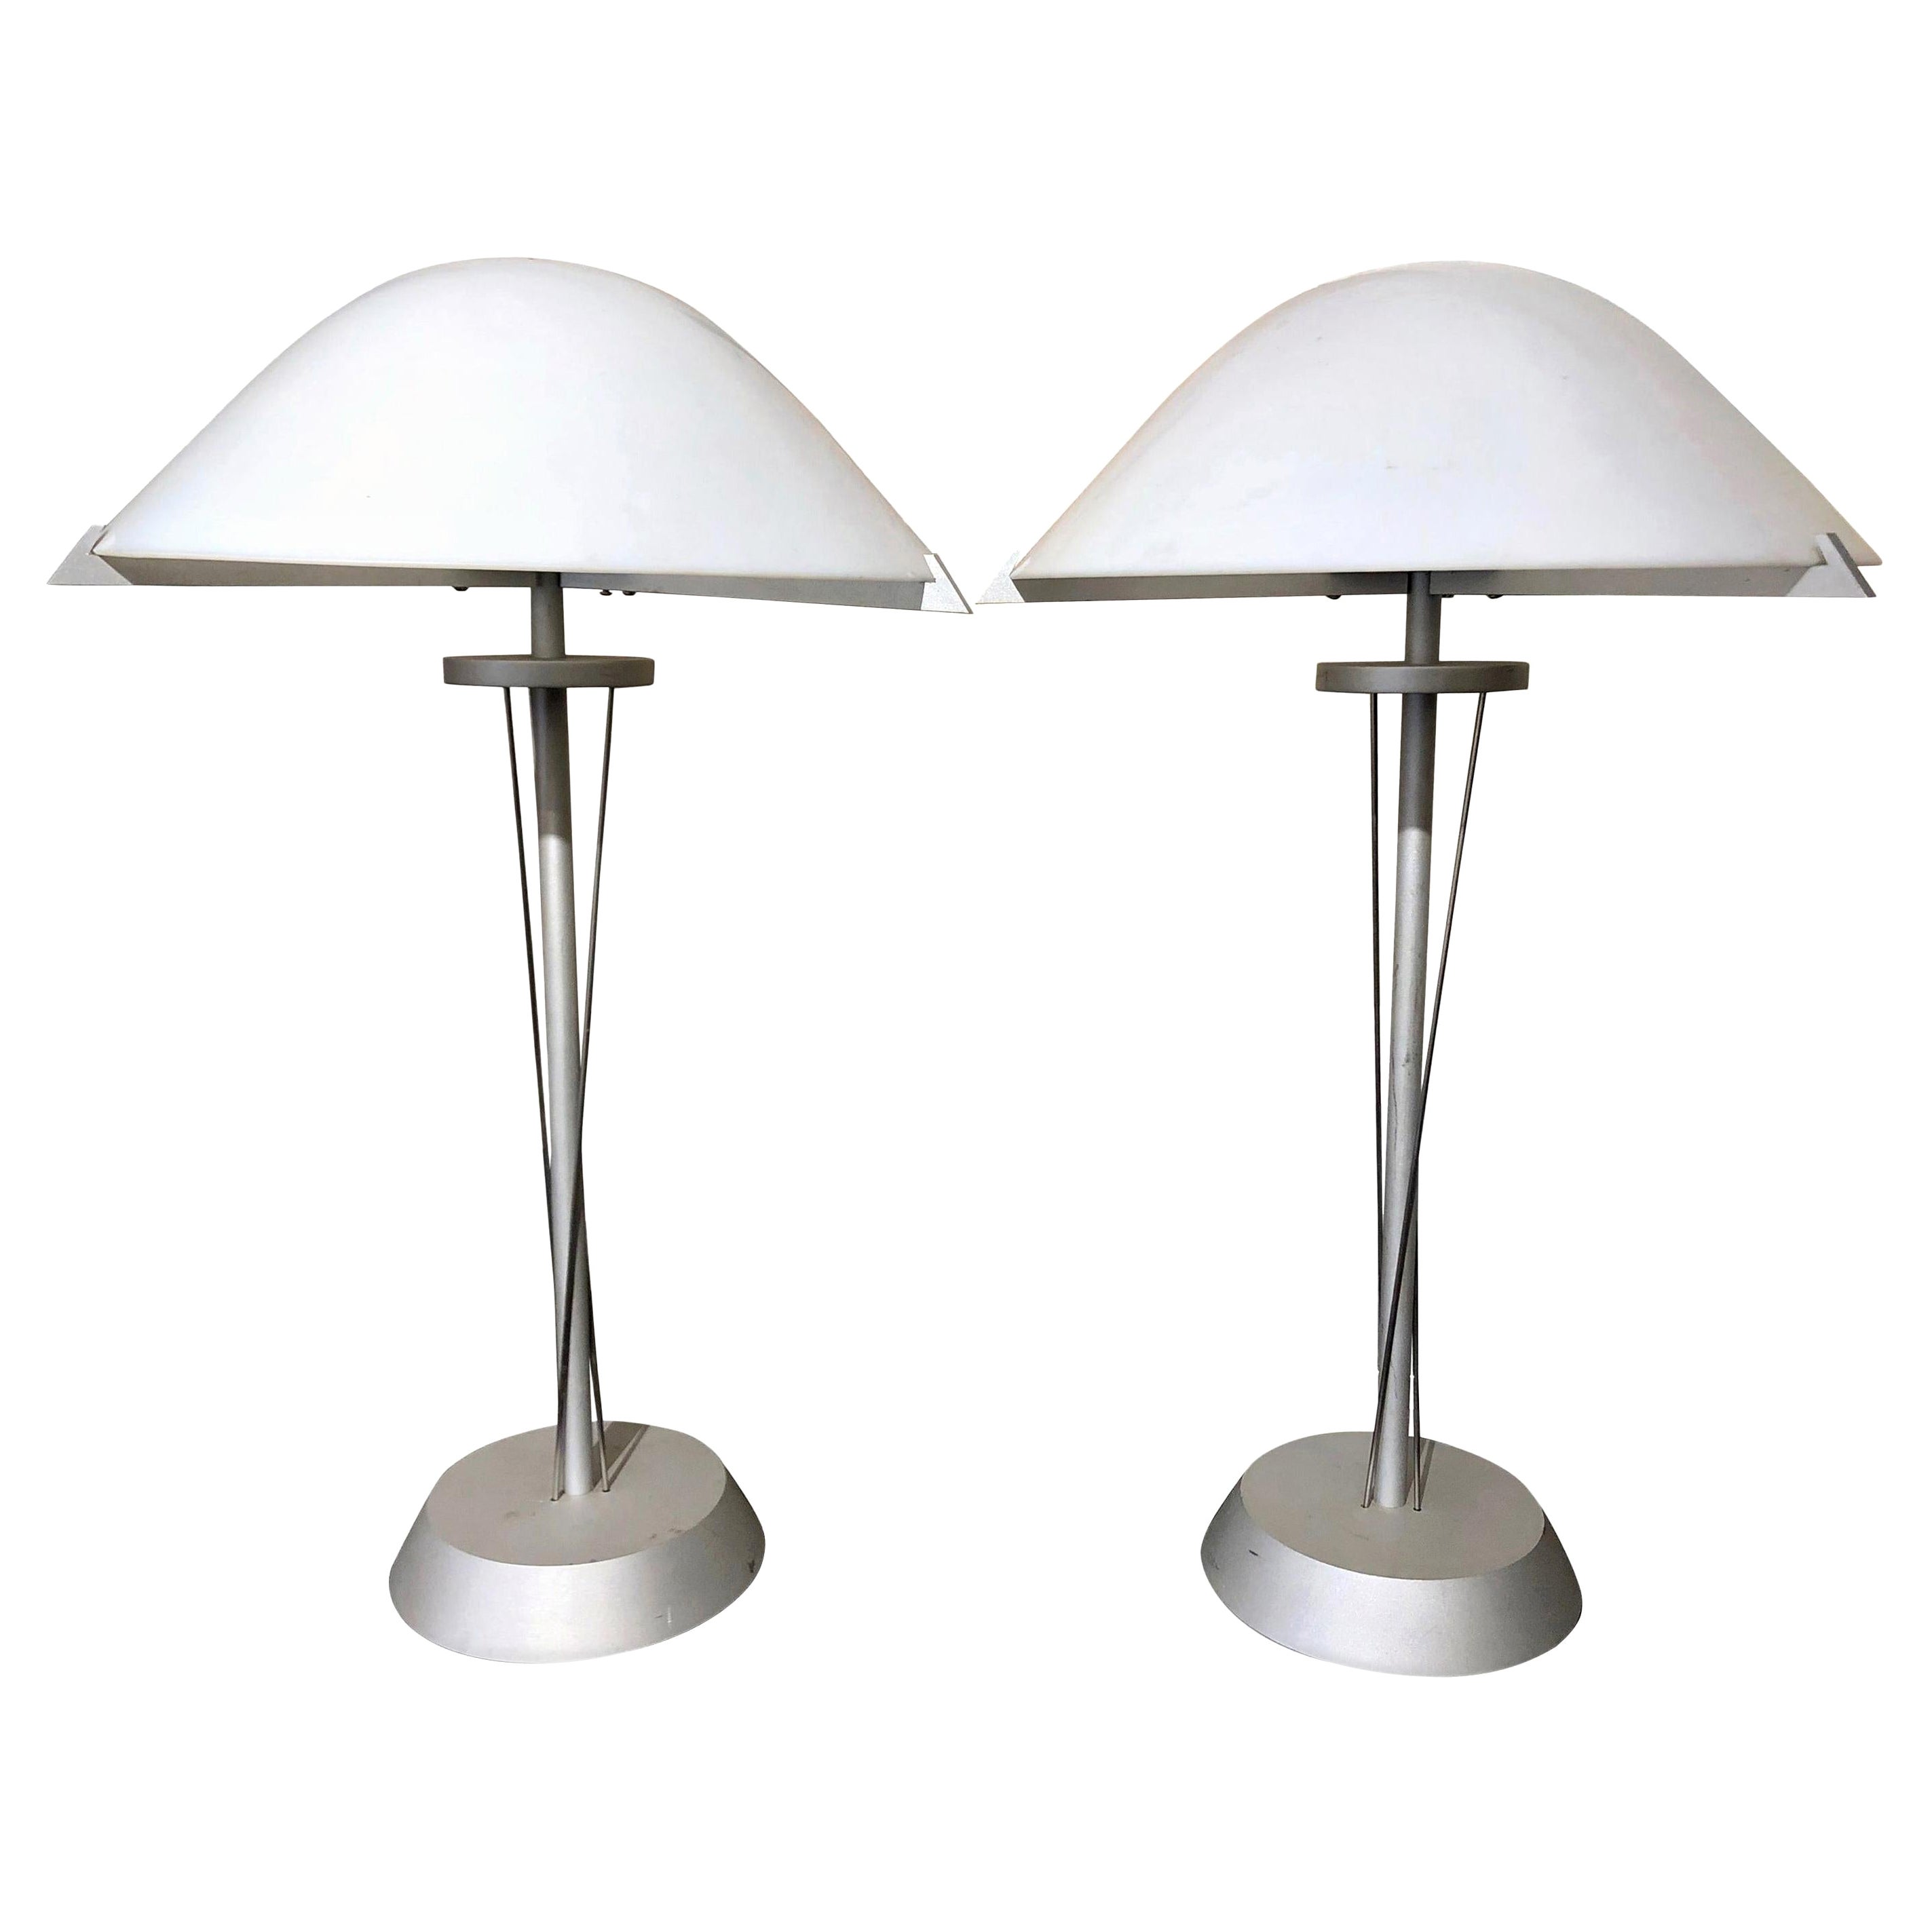 Pair of 20th Century German Postmodern Steel Lamps with White Milk Glass Shades